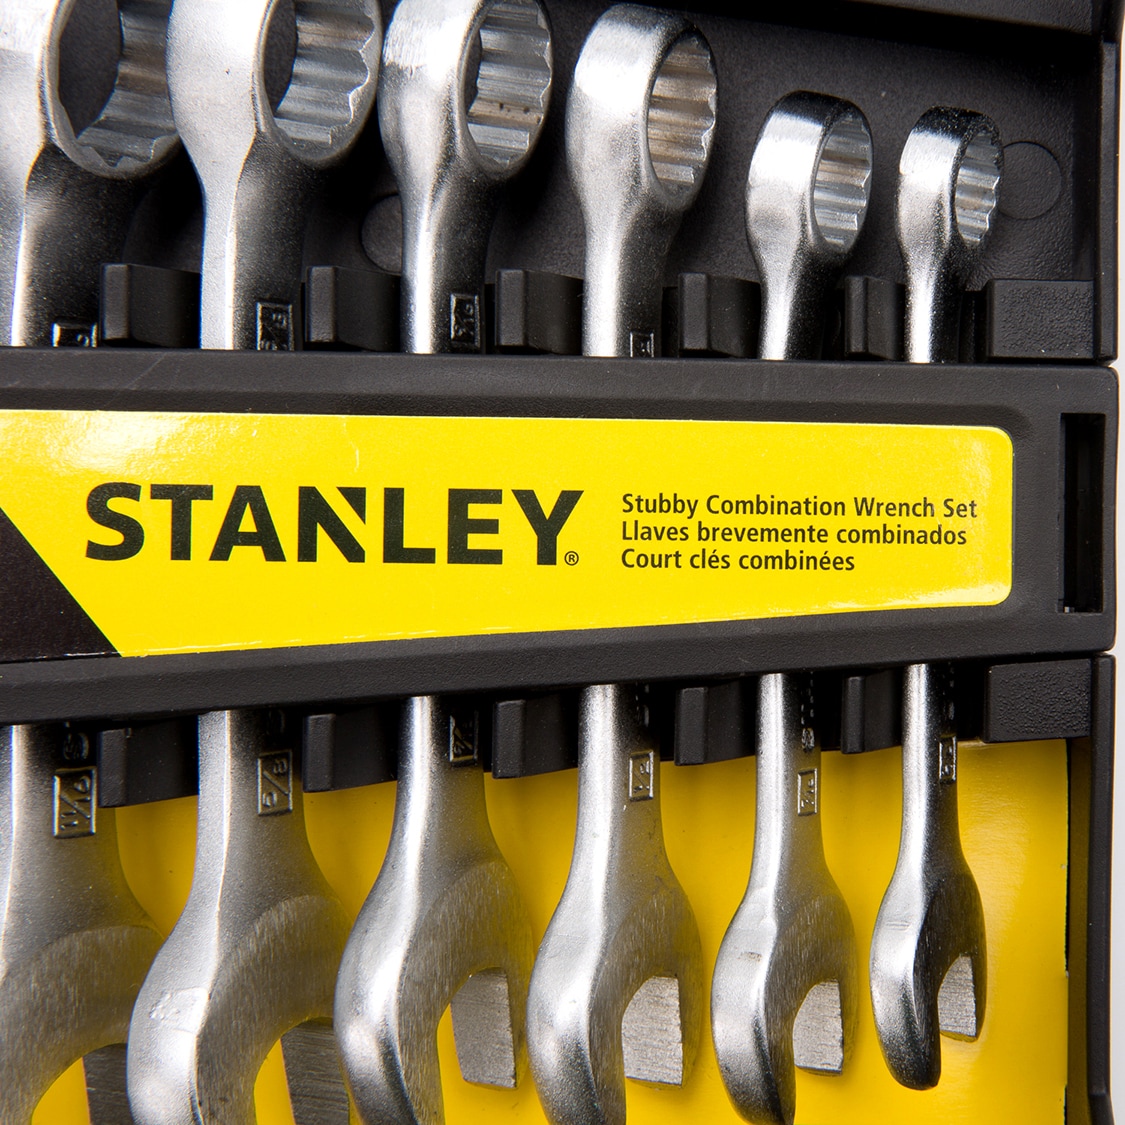 Stanley 7-Piece 12-Point Standard (SAE) Standard Combination Wrench Set at